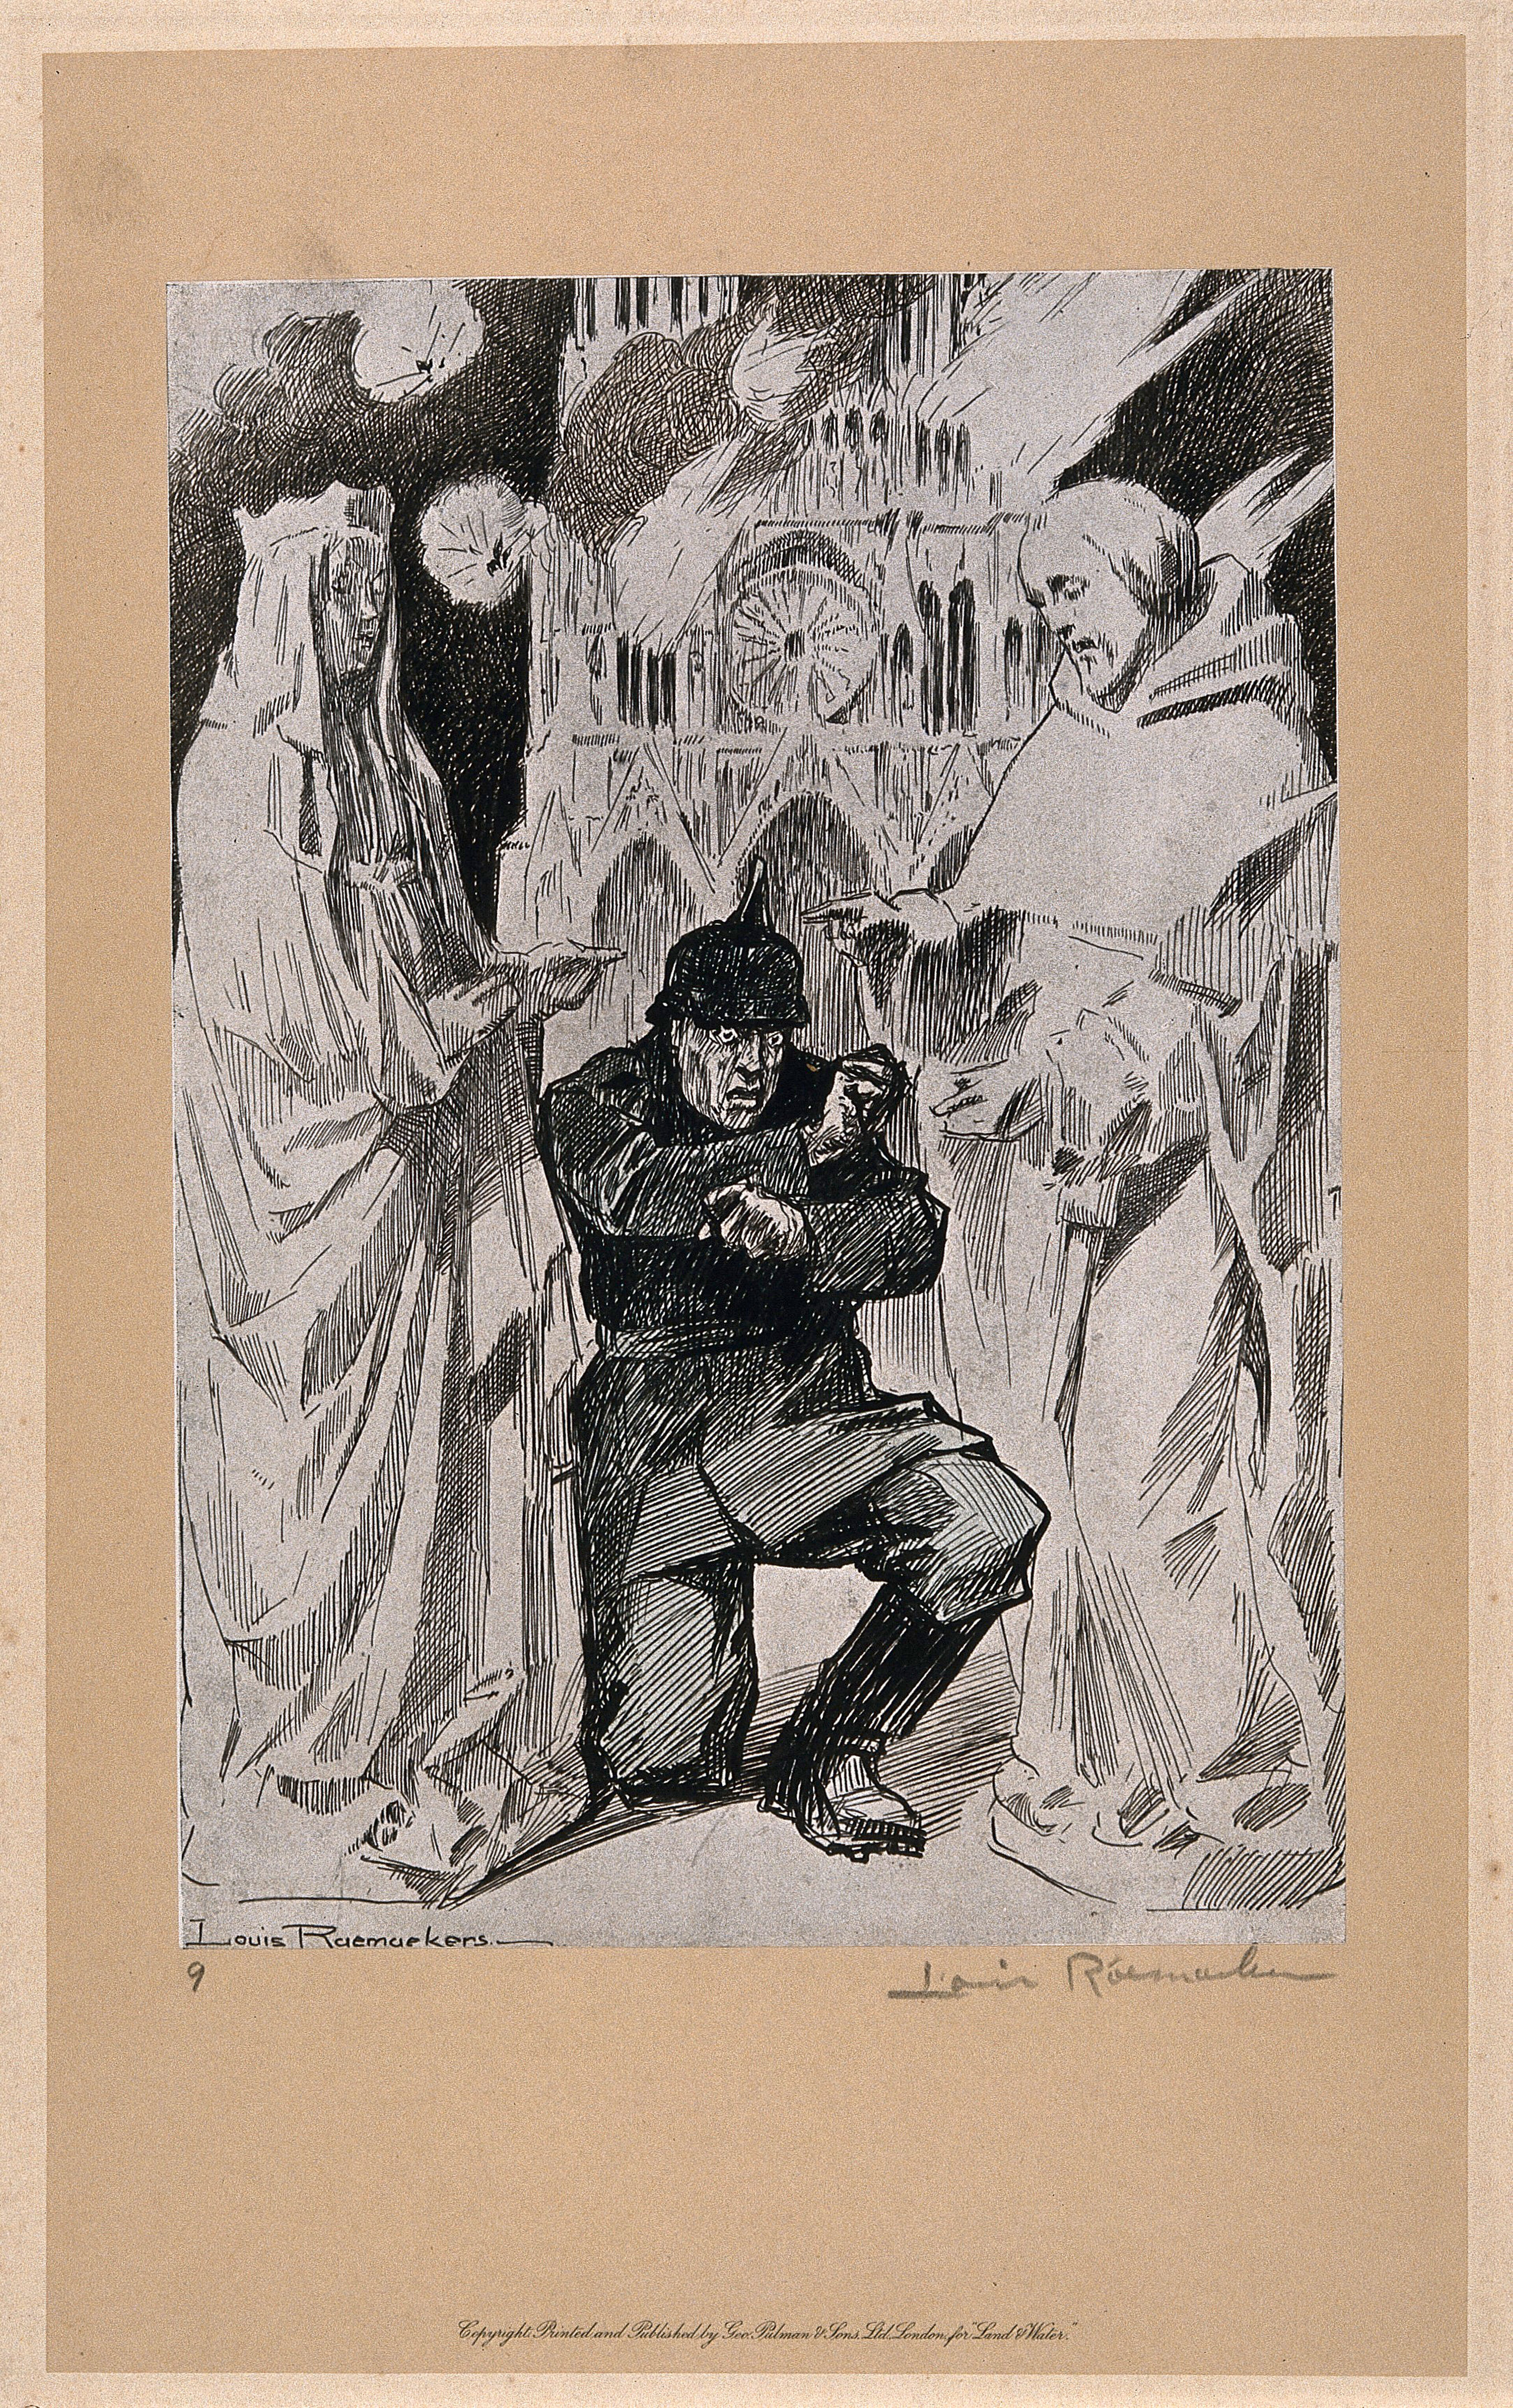 World War One: a German soldier crouches in fear between two saintly mediaeval sculptures; behind Notre Dame is burning. Halftone after a pen drawing by L. Raemaekers.